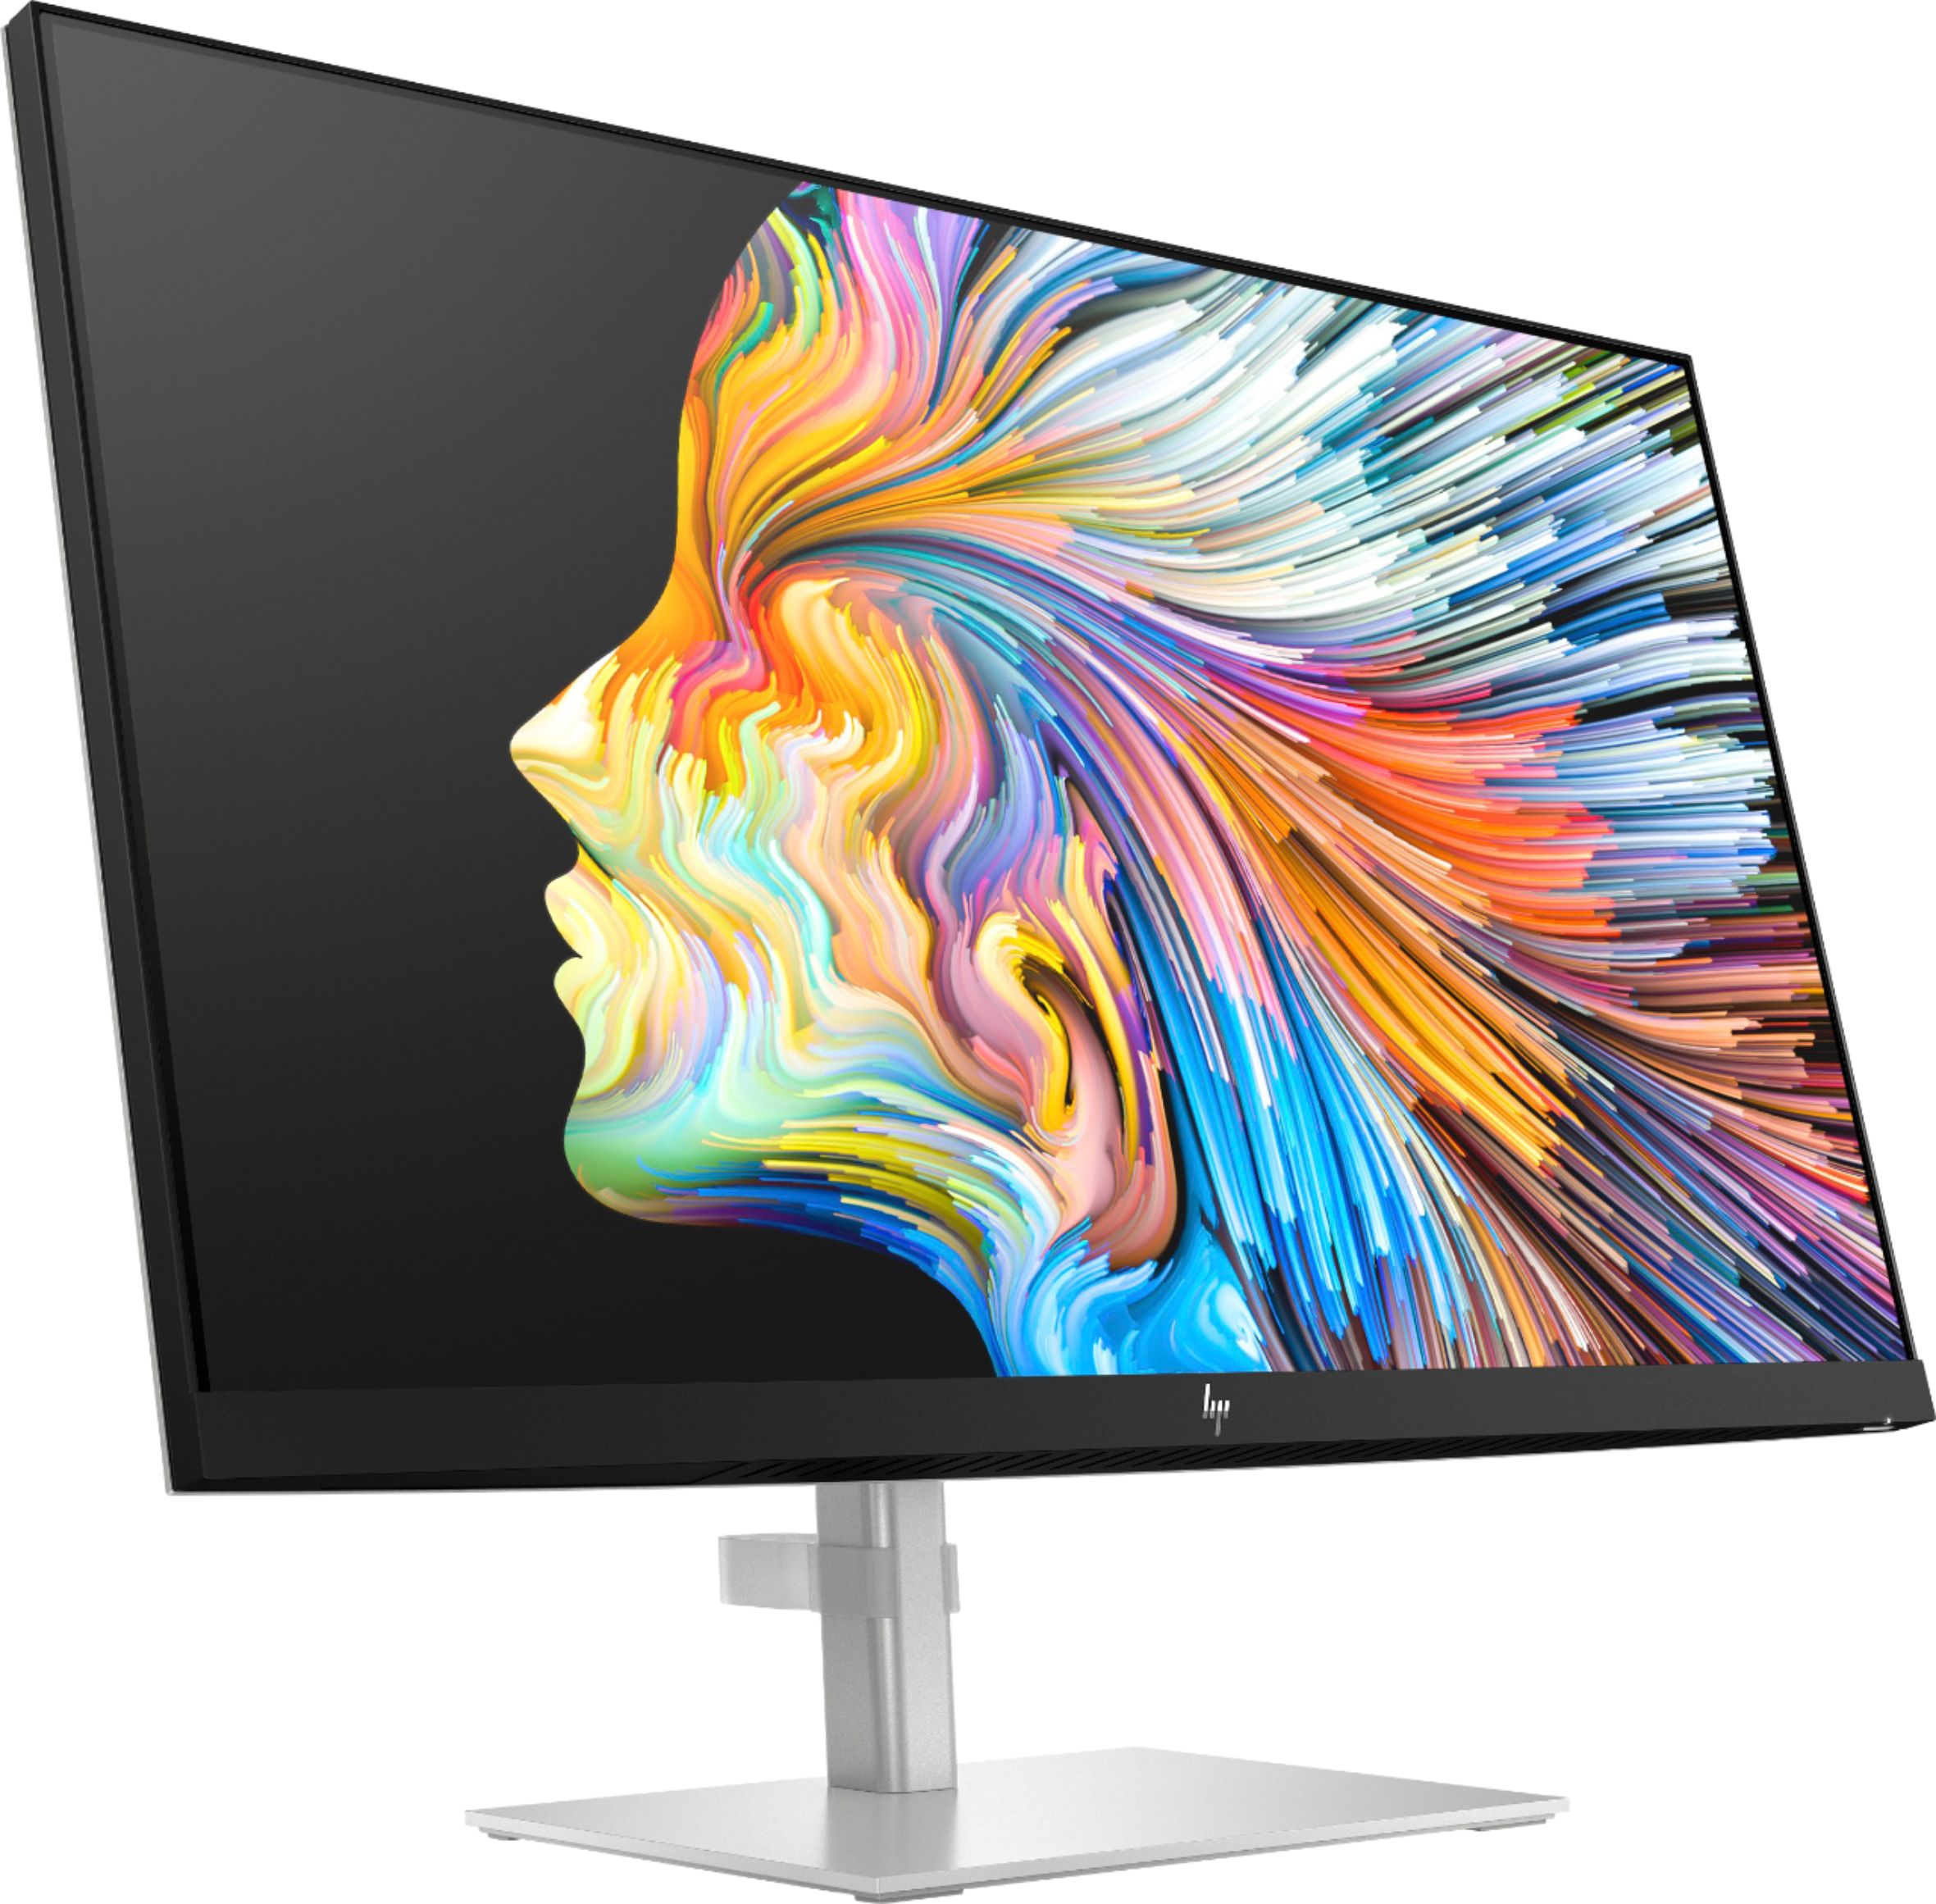 Left View: HP - 28" IPS LED 4K UHD Monitor with HDR (HDMI, DisplayPort) - Silver & Black